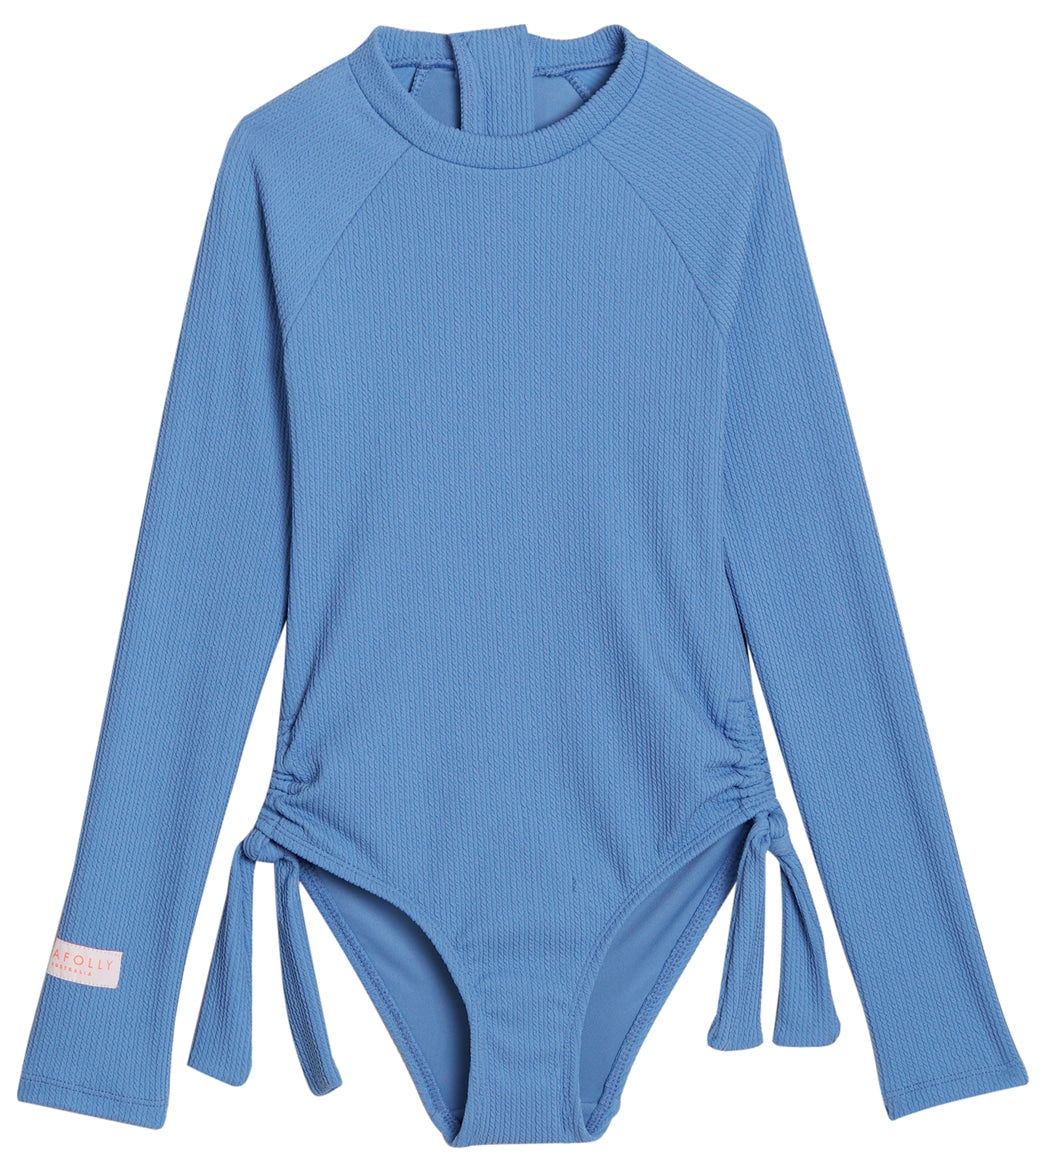 Seafolly Girls Essential Long Sleeve One Piece Swimsuit (Big Kid)